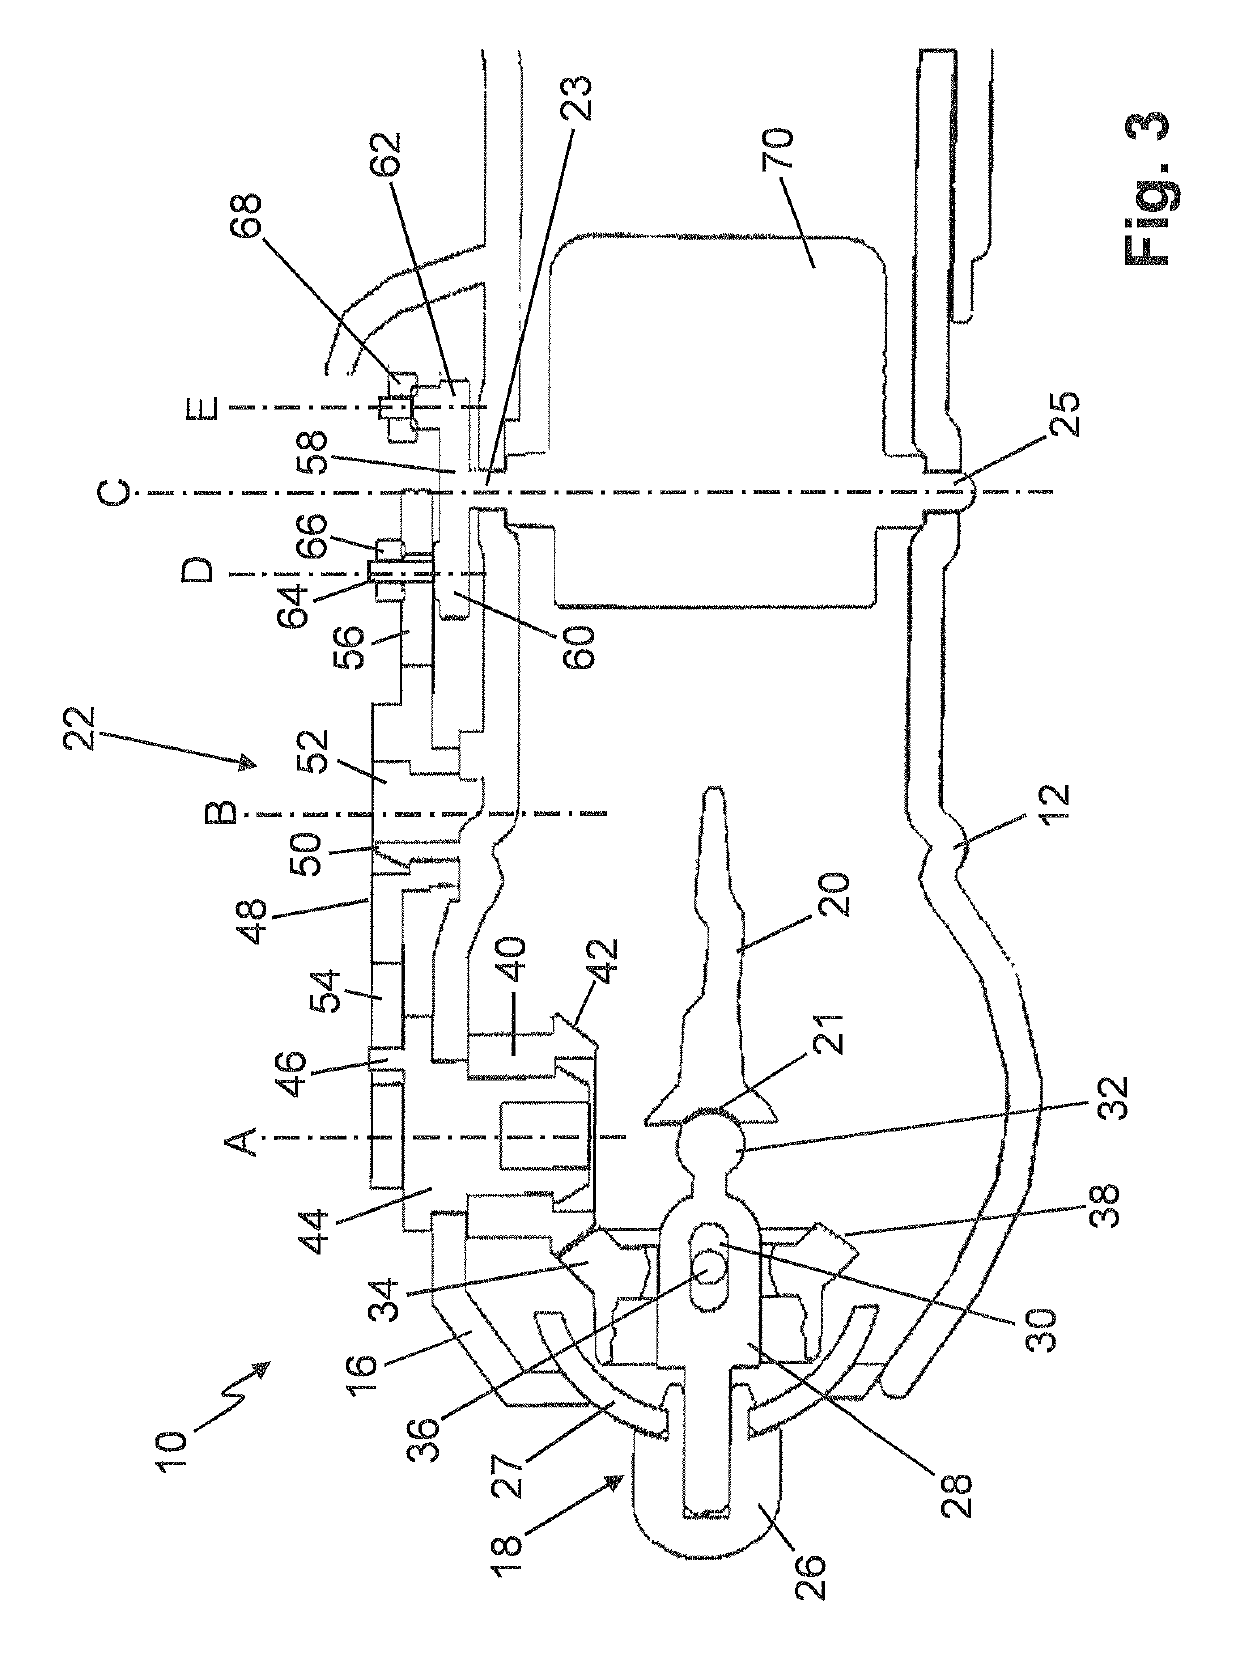 Device for controlling an air stream